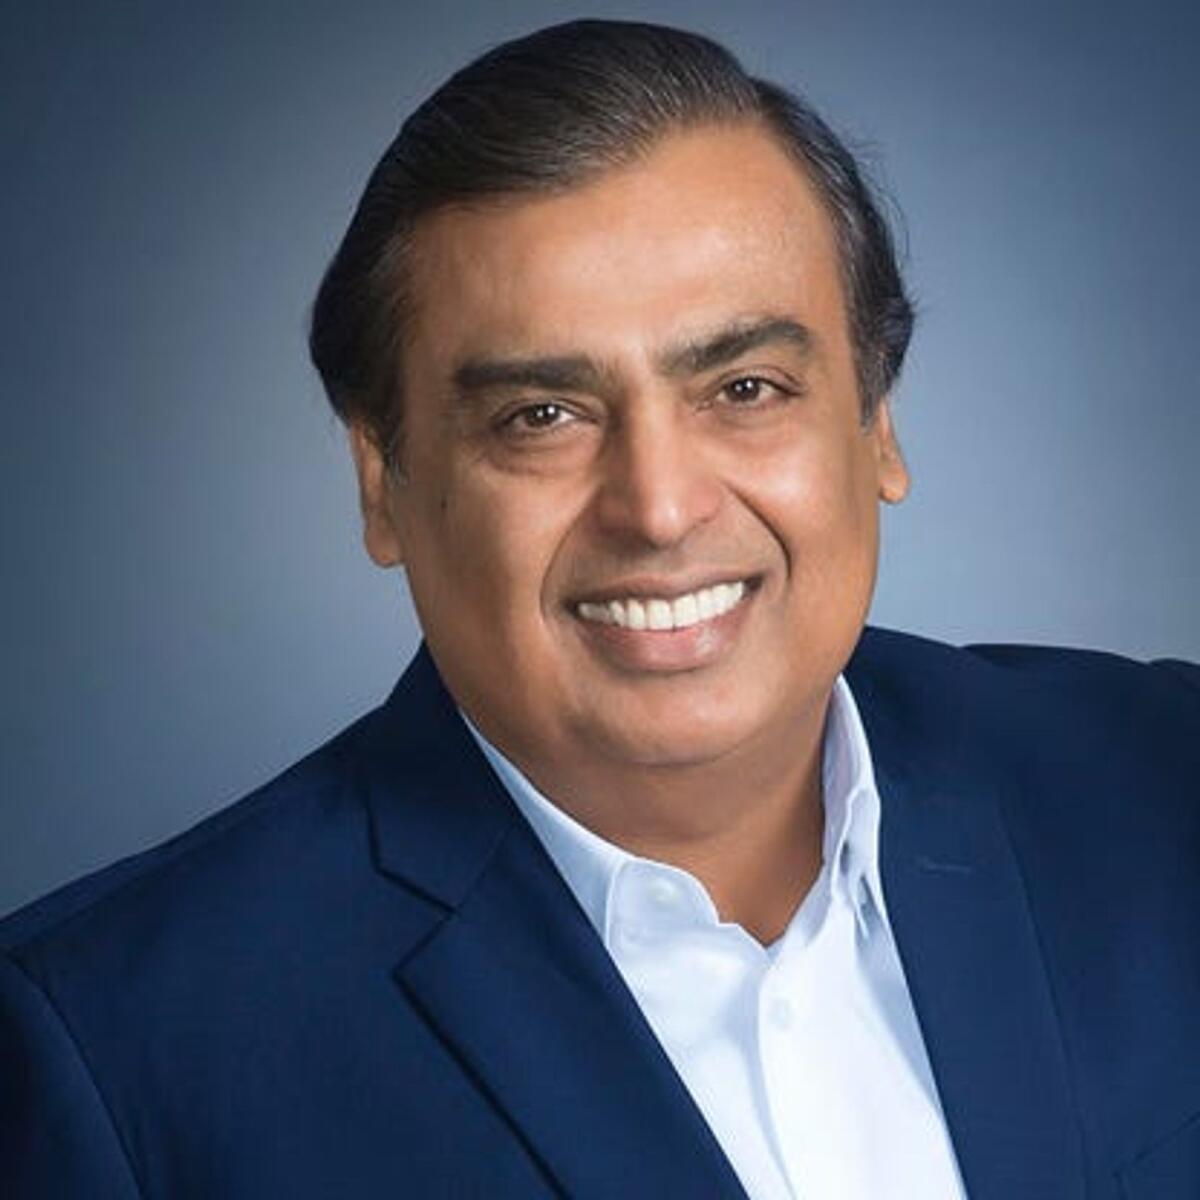 Mukesh Ambani, the Indian business tycoon and the Chairman and MD of Reliance Industries. Image credit: Forbes